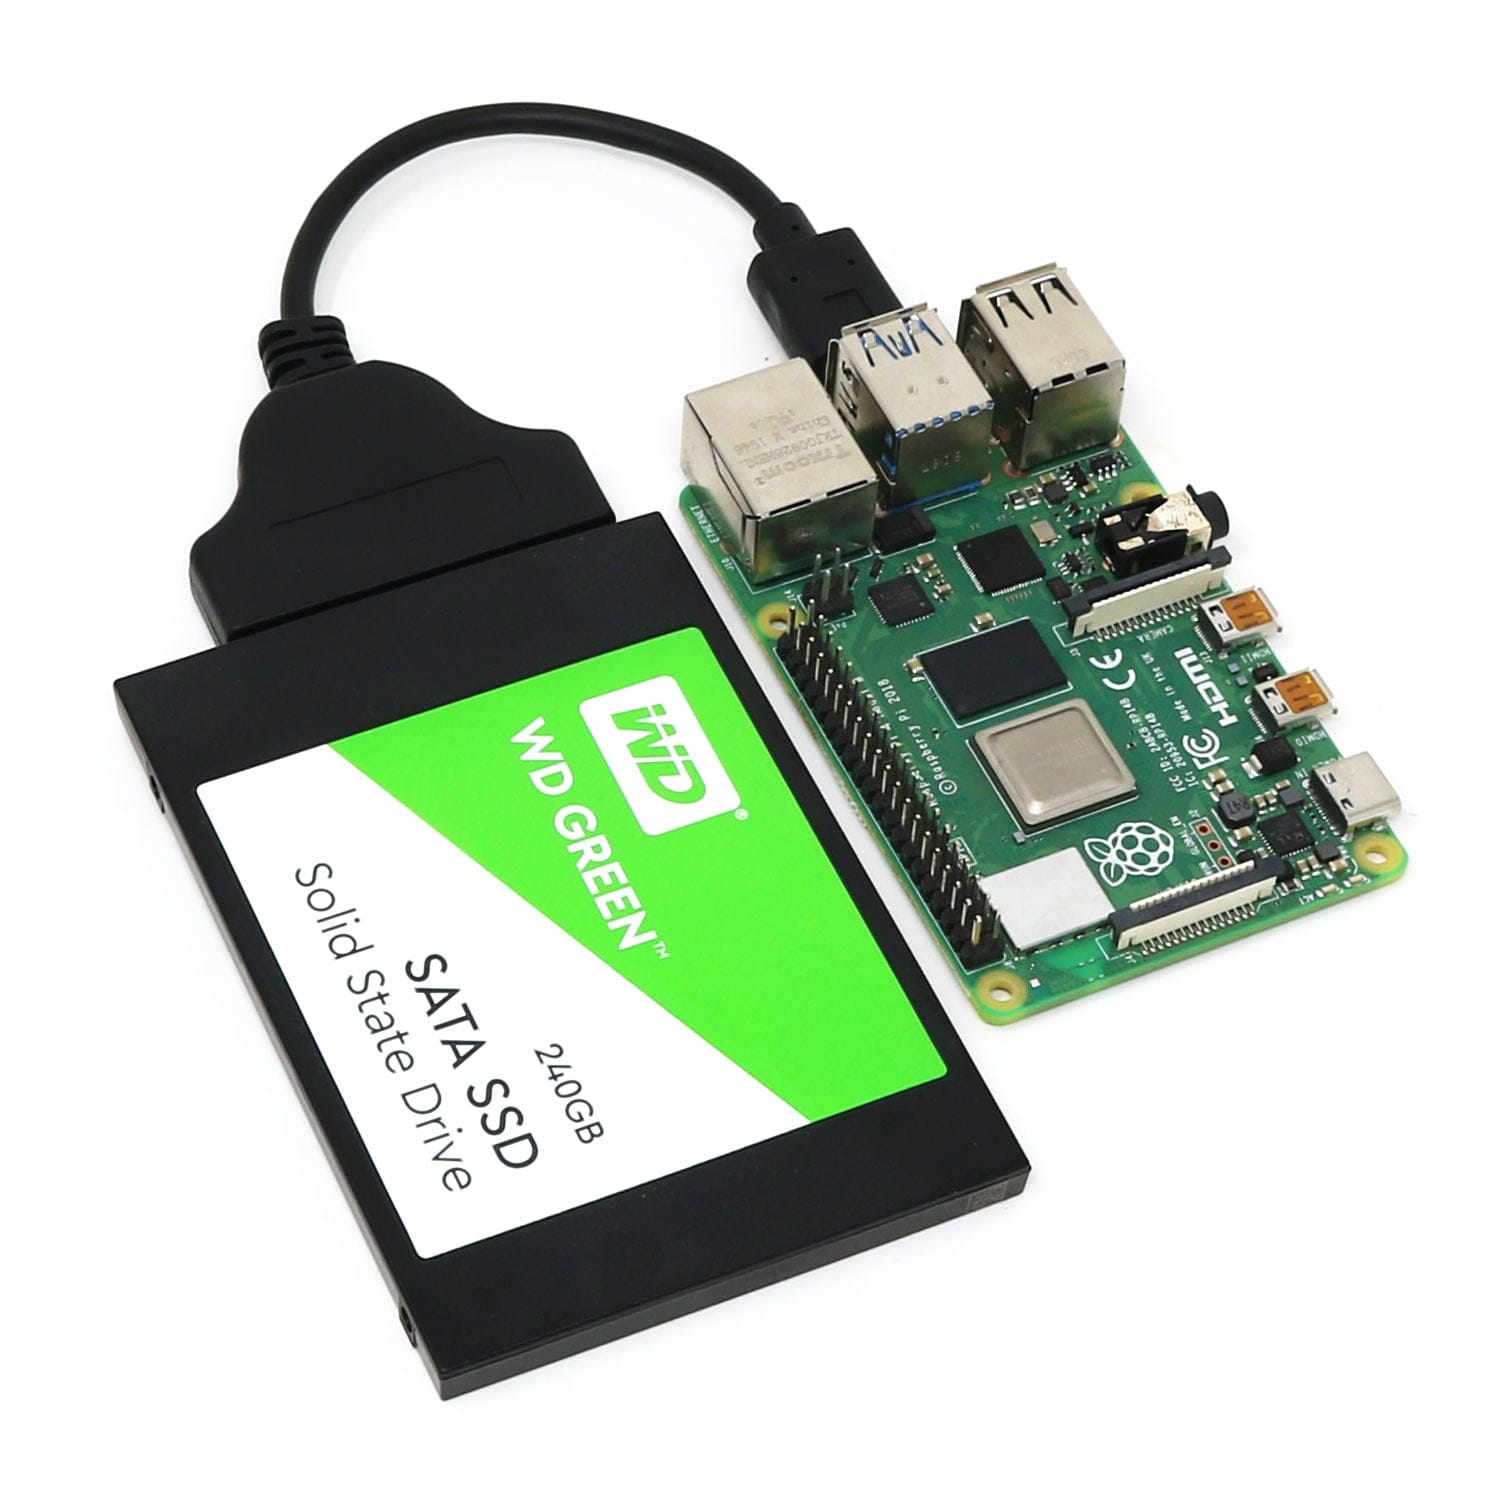 SSD to USB 3.0 Cable for Raspberry Pi The Pi Hut